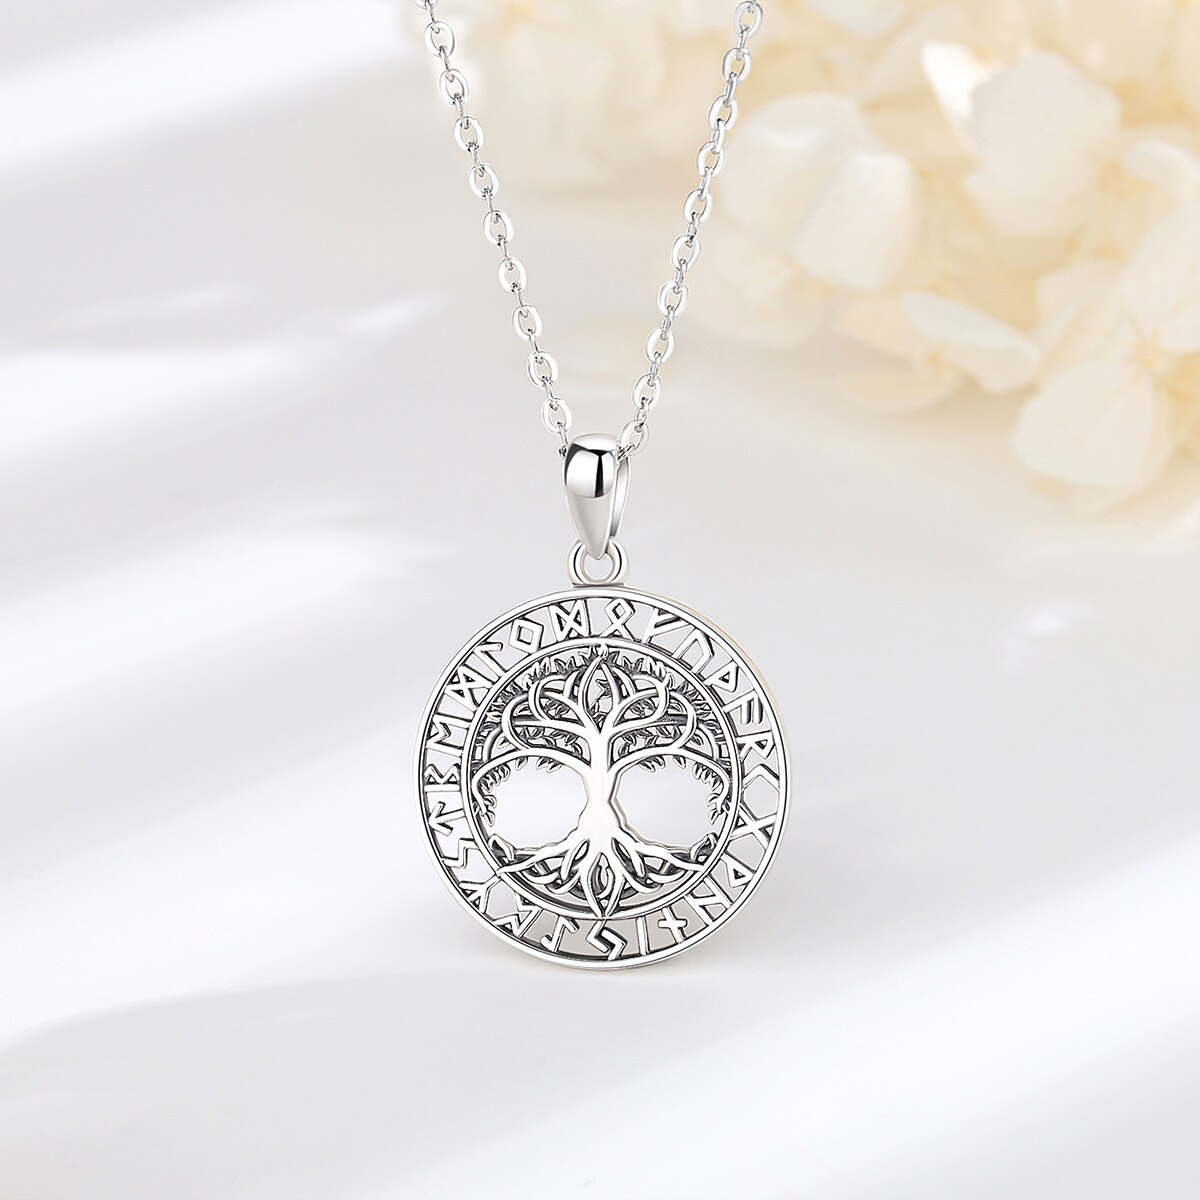 Eudora Real 925 Sterling Silver Tree of Life Necklace Vintage Simple Pendant Fashion Fine Tree Jewelry for Women Man Bijoux Gift